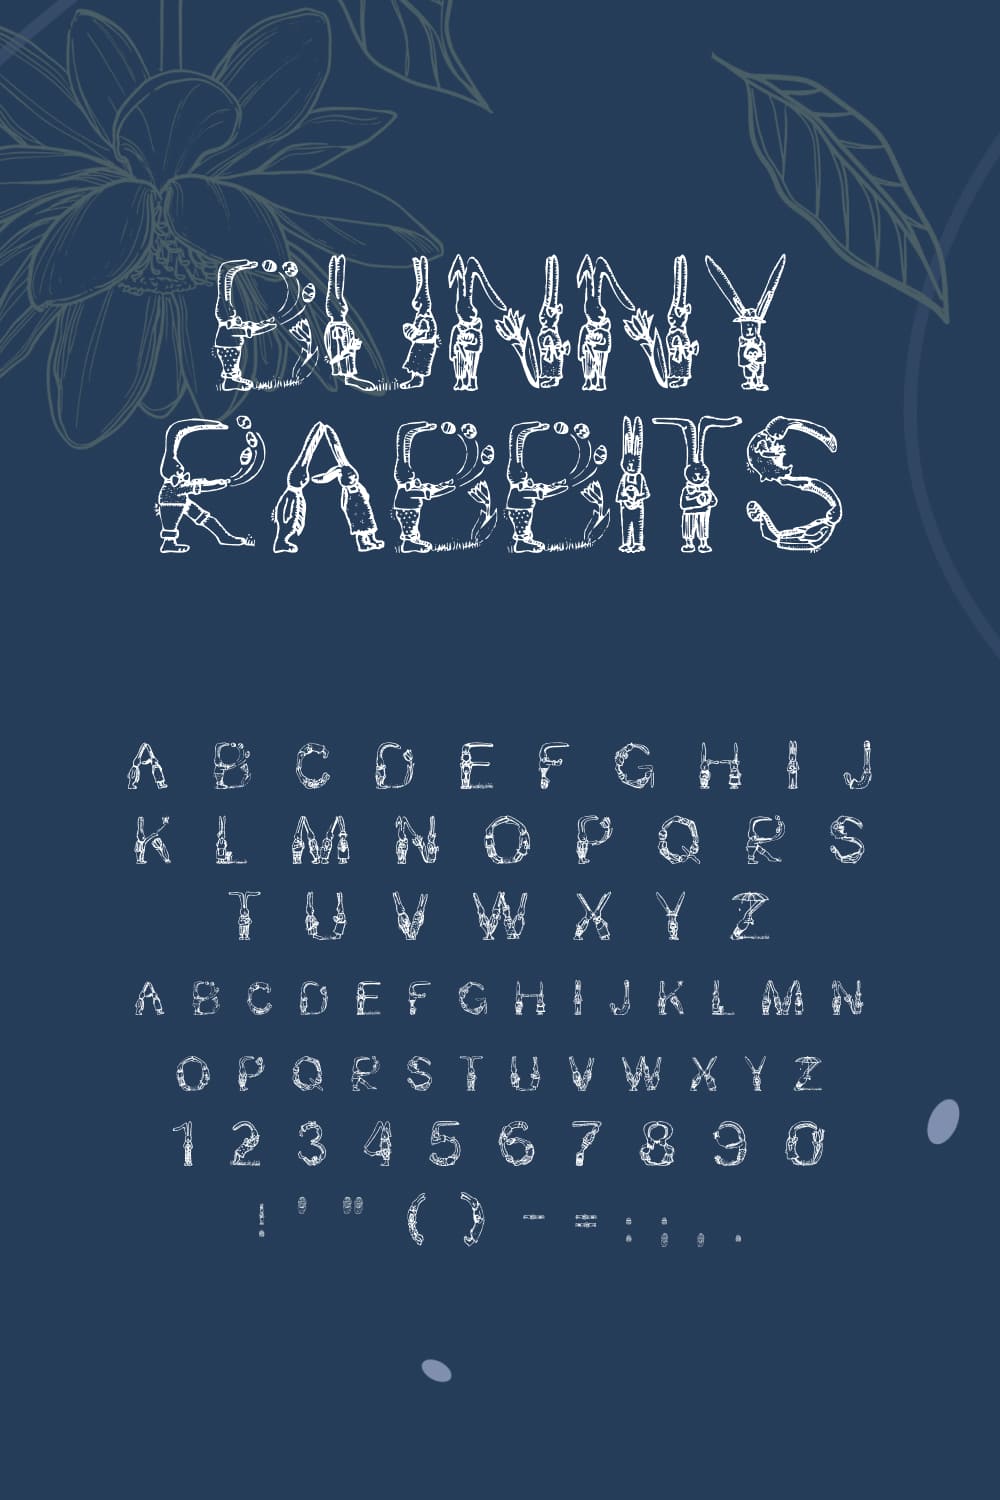 Letters made up of rabbits on a blue background.